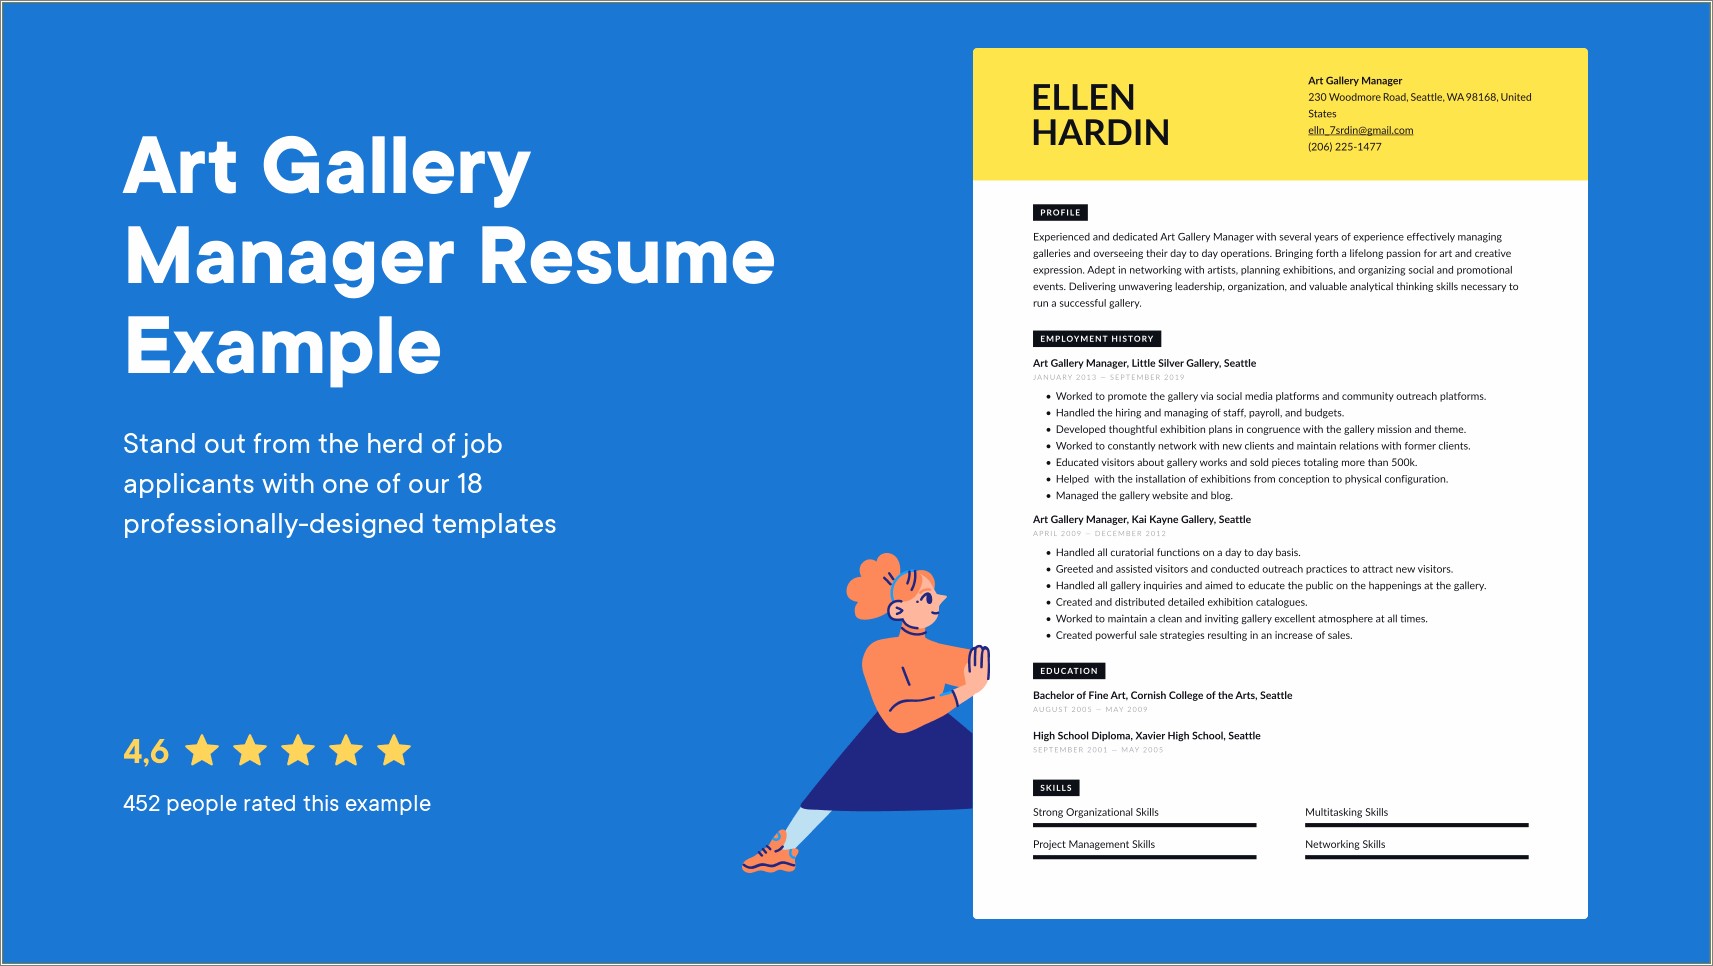 Resume For Art Gallery Manager Position